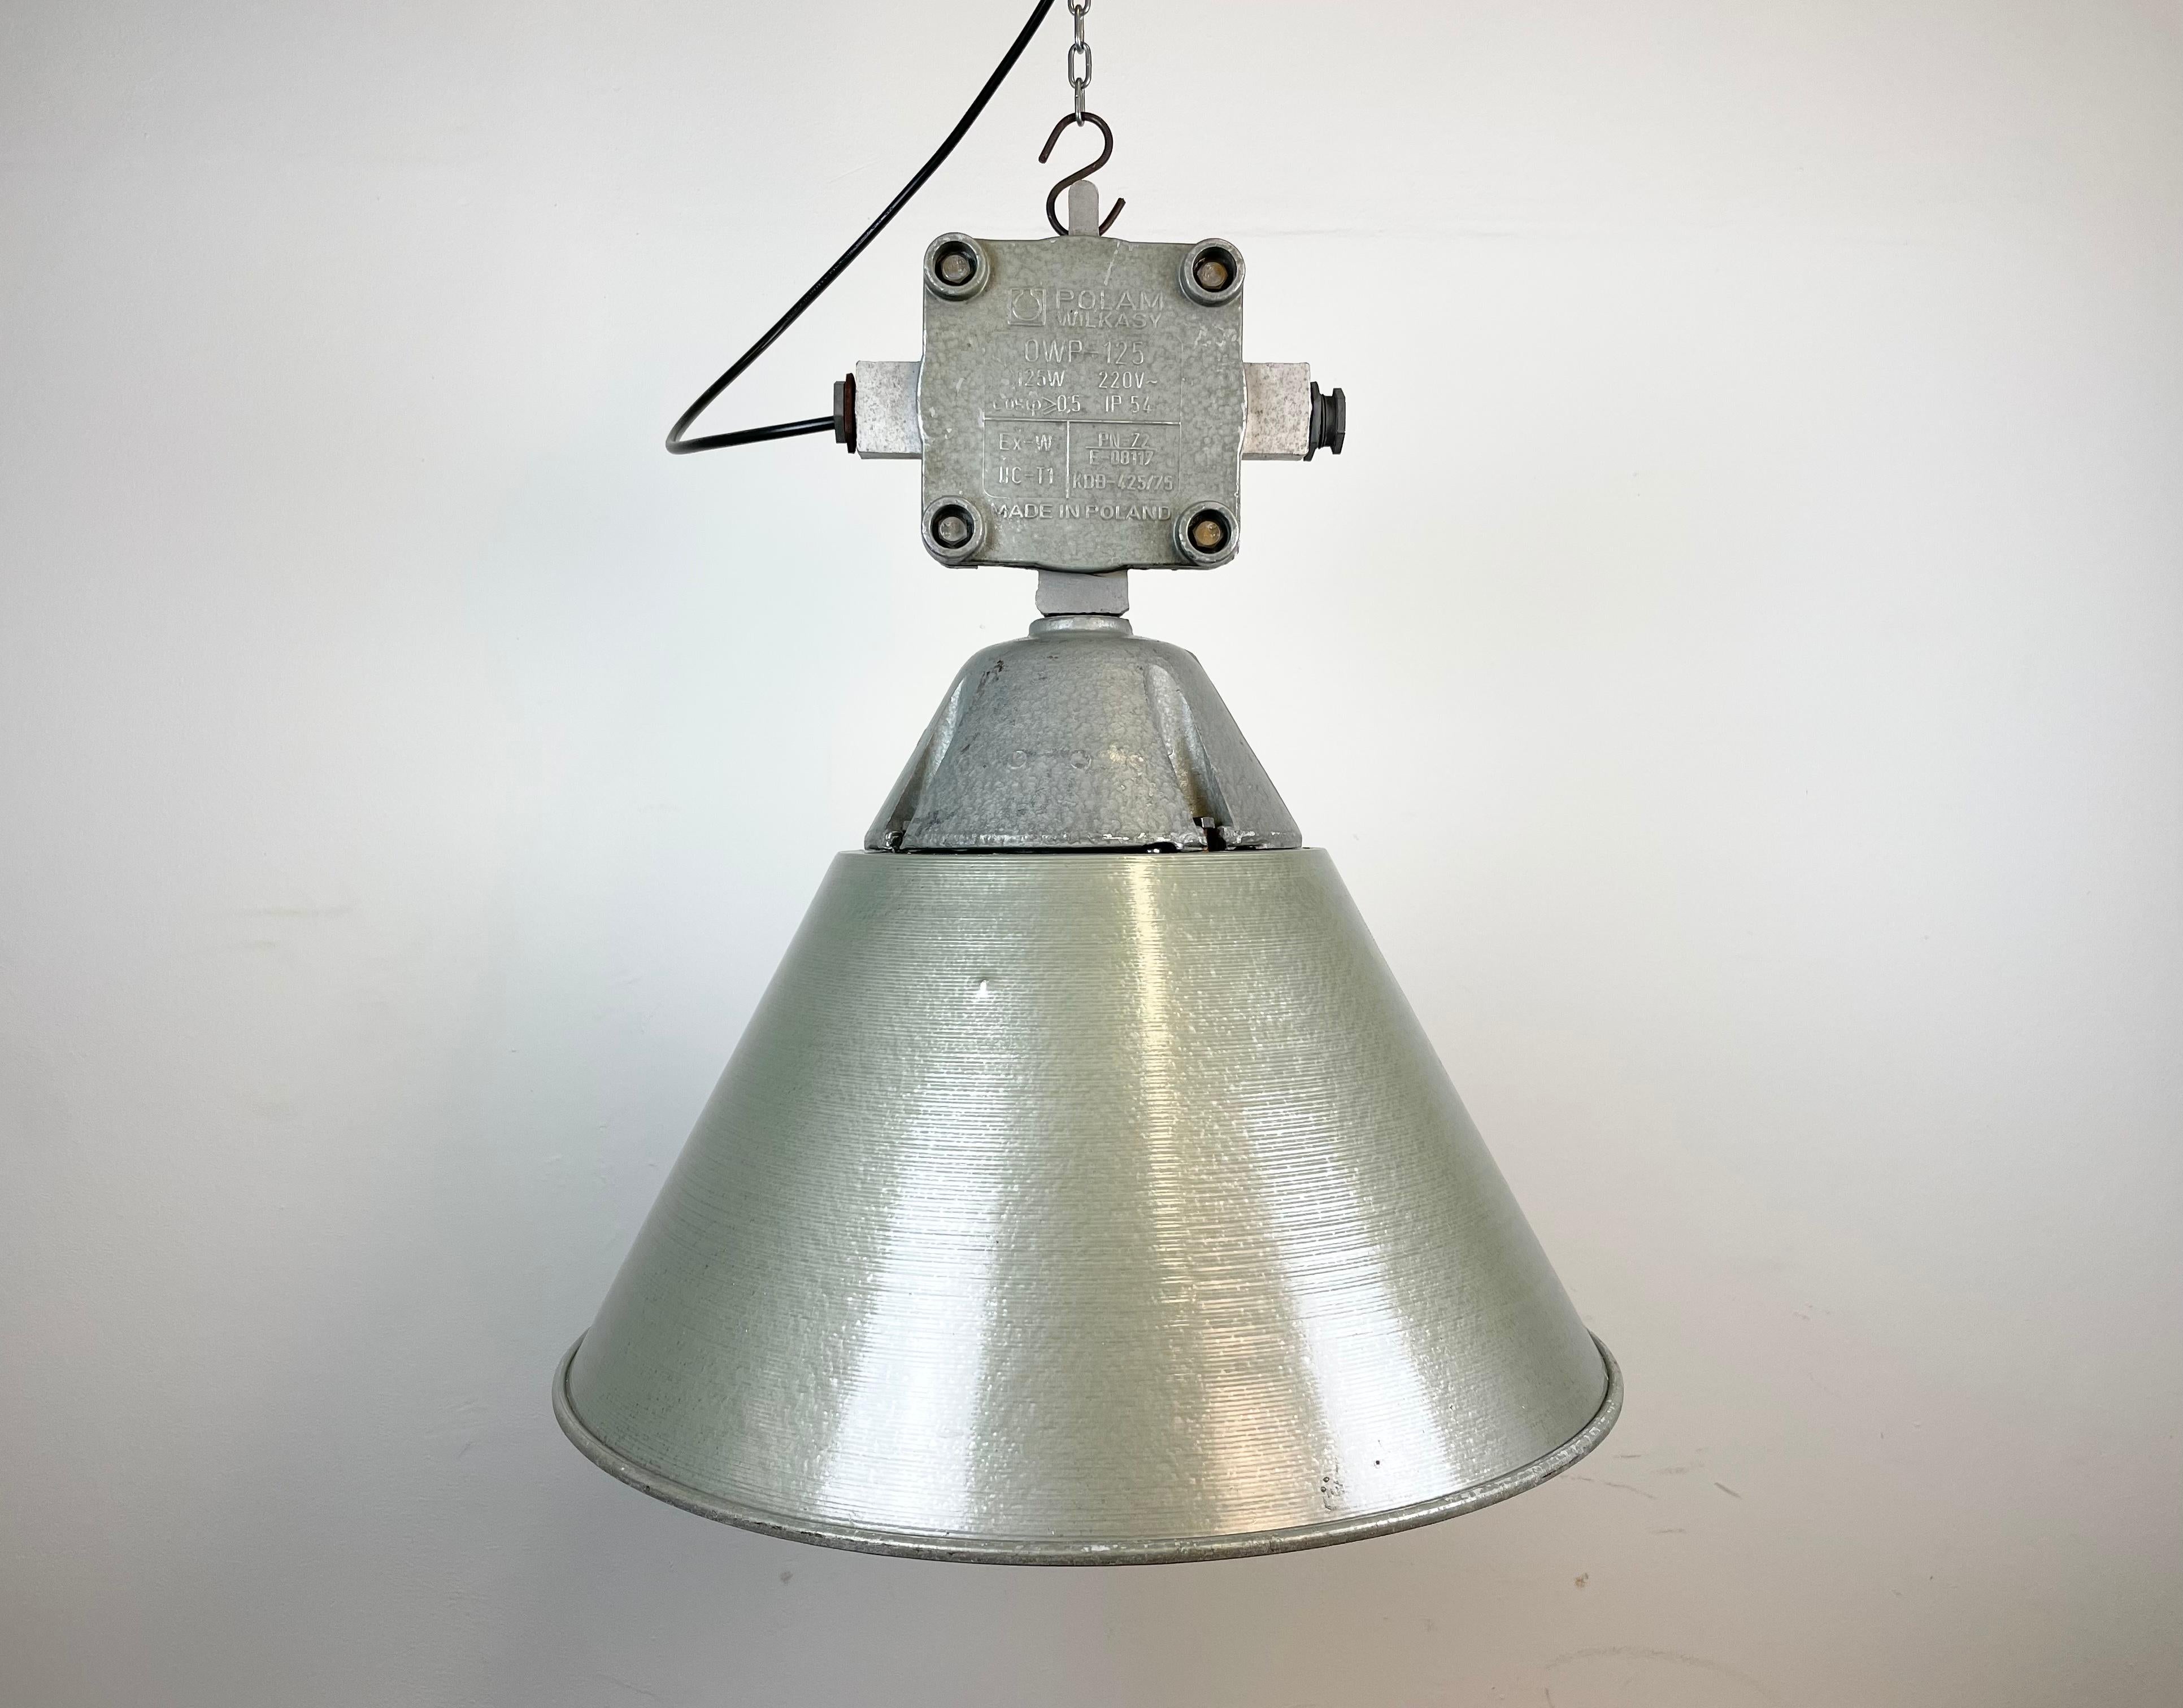 Industrial factory light manufactured by Polam Wilkasy in Poland during the 1970s. It features a cast aluminium body, an iron cage ,an explosion-proof mikl glass and aluminium shade.
The socket requires E27 lightbulbs. New wire. The weight of the